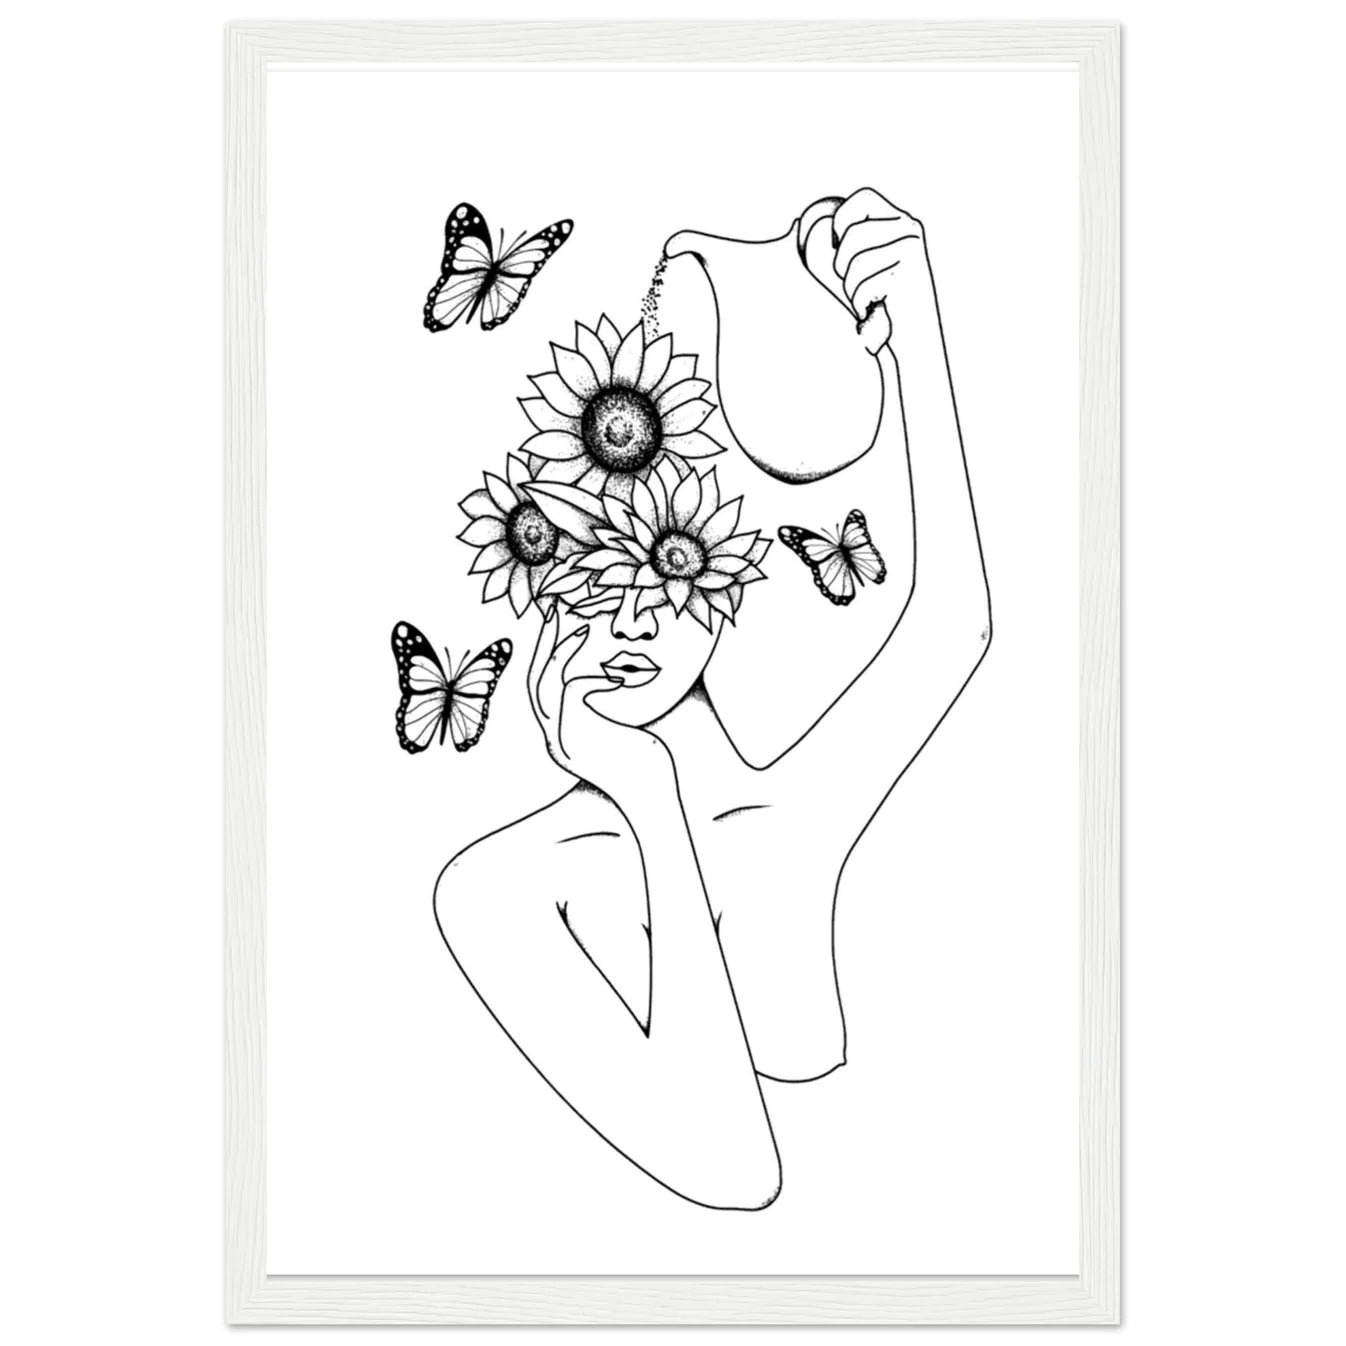 Zach Bryan Sun to Me Inspired Wooden Framed Graphic Print